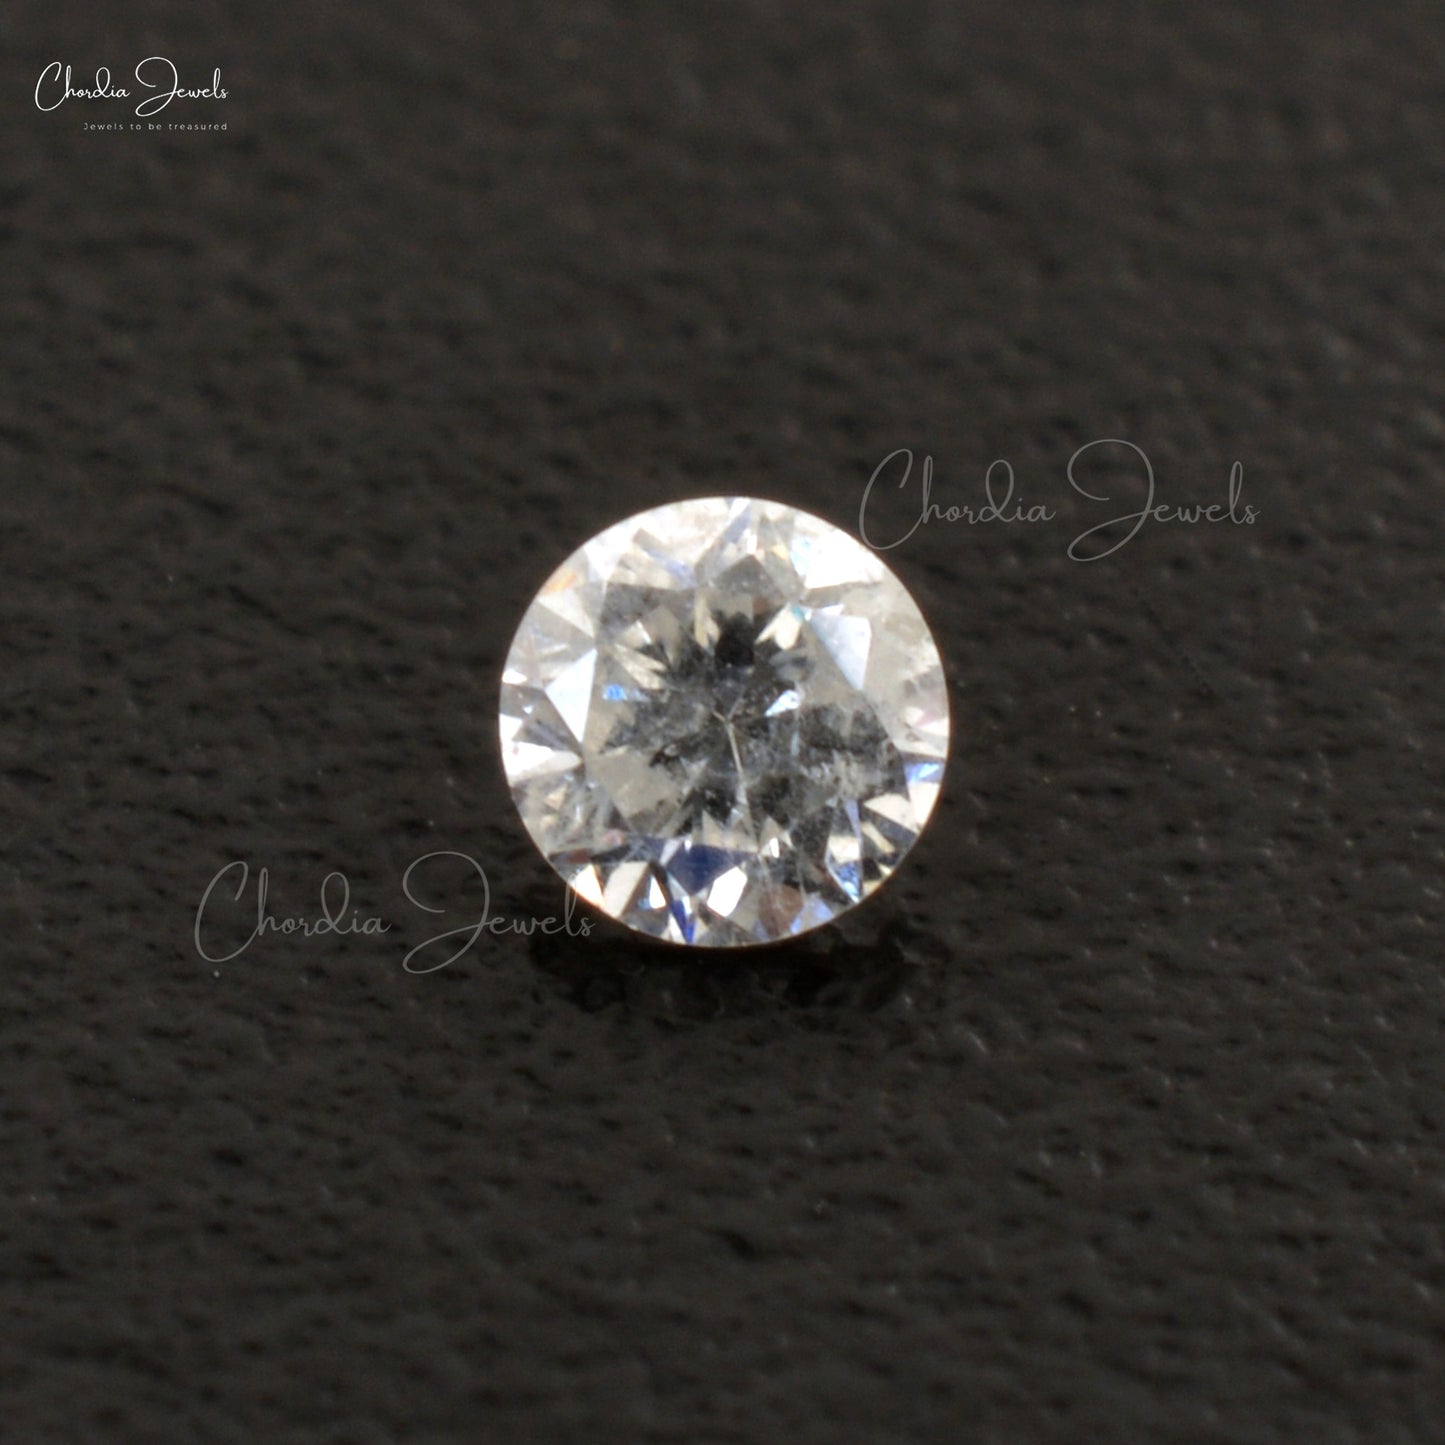 Load image into Gallery viewer, White Diamond 1.80 MM Faceted Round Cut I1-I2 / G-H Natural Gemstone, 1 Piece
